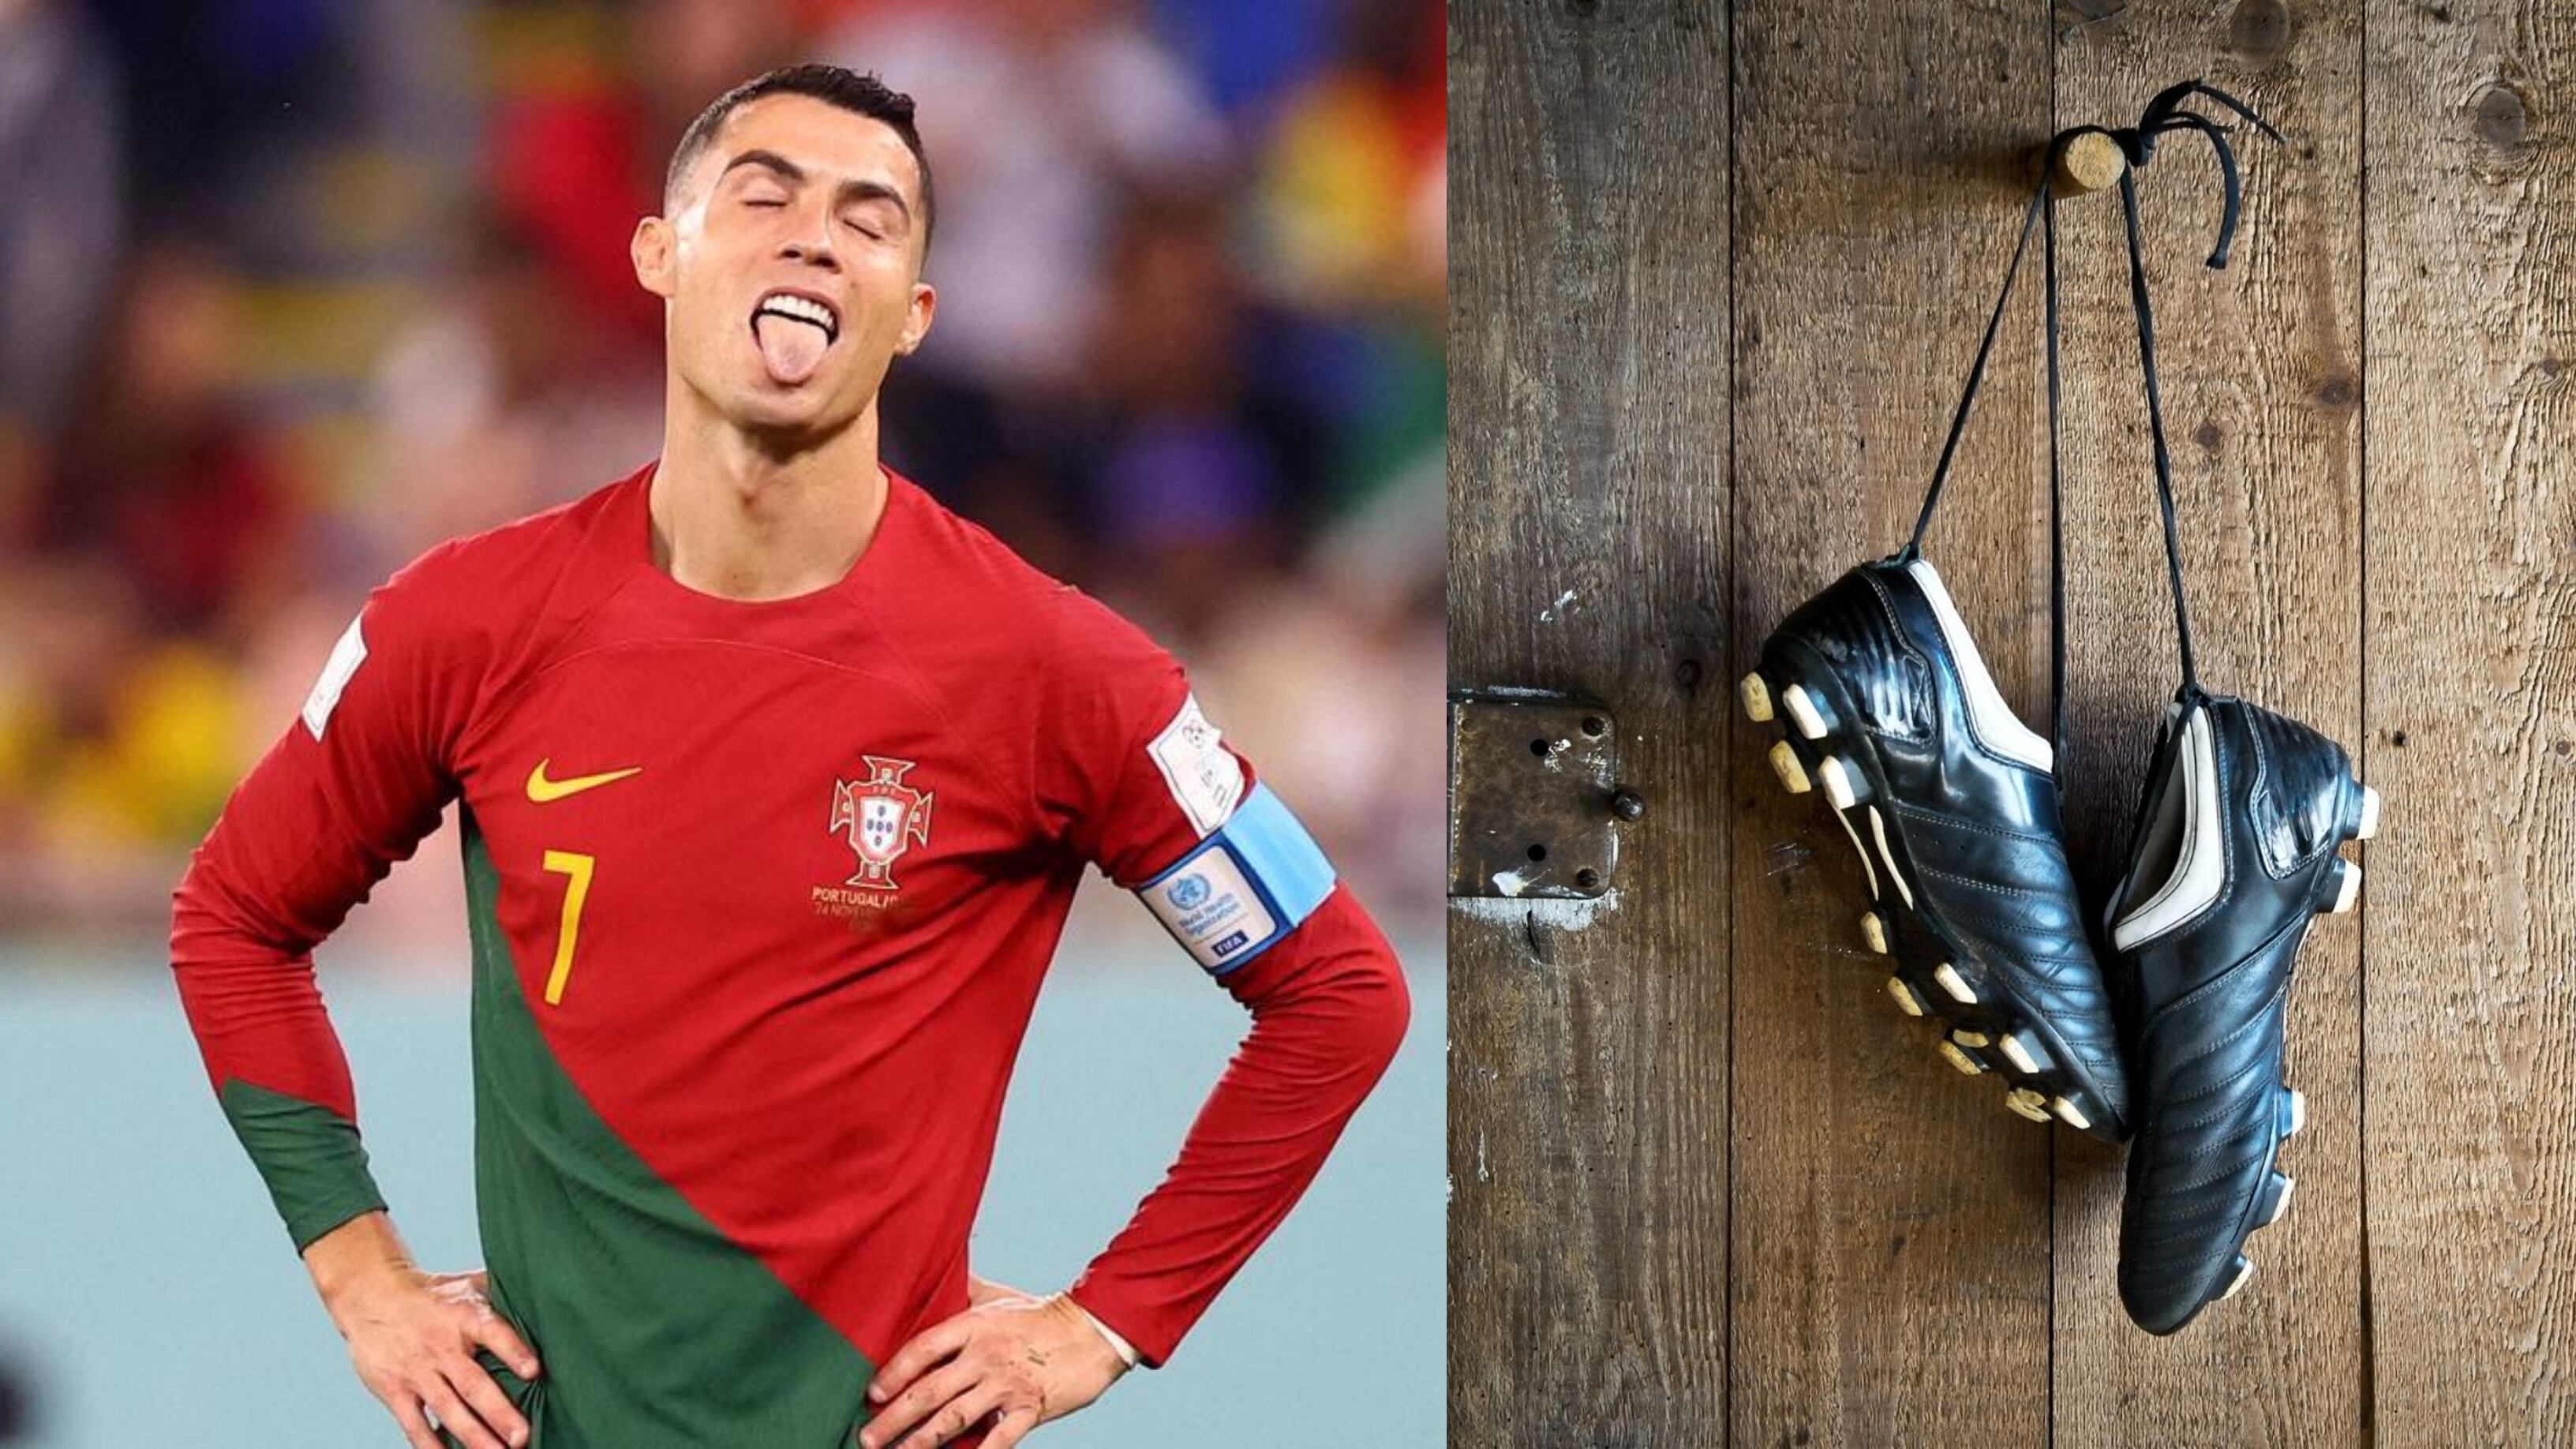 Breaking news, Cristiano Ronaldo revealed the date of his retirement